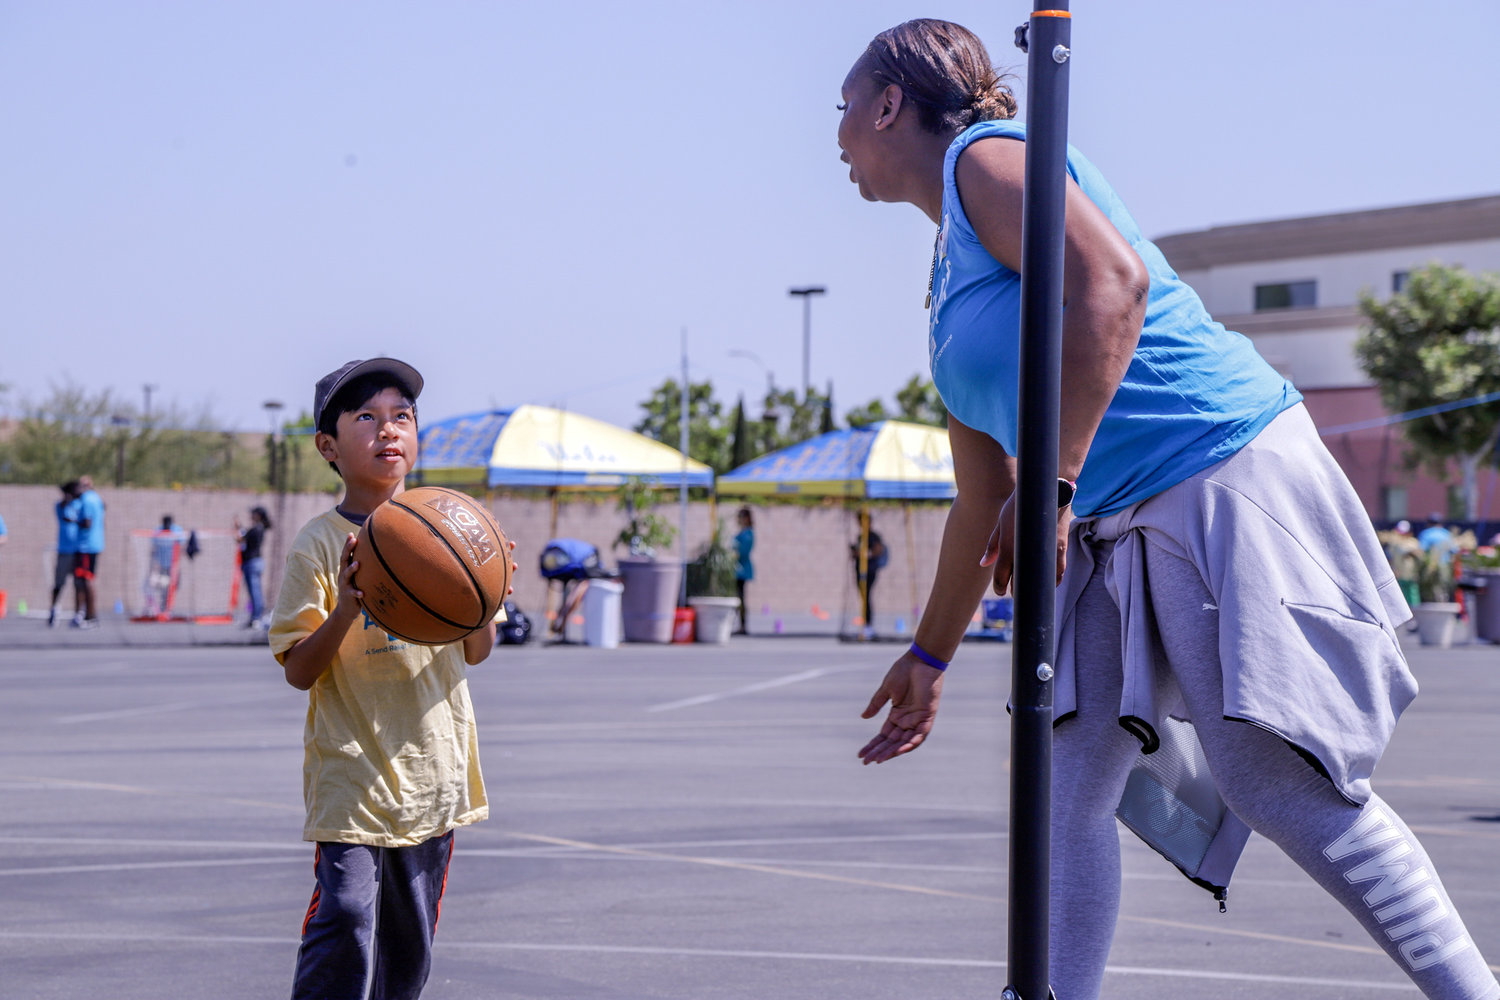 Cynthia Baker, a member of First Southern Baptist Church of Anaheim, Calif., encourages a child to shoot a basket during a sports camp at the church June 11, 2022, as part of Crossover Anaheim. The event was one of several evangelistic events held across the greater Los Angeles area prior to the 2022 SBC Annual Meeting. (NAMB/Luc Stringer)